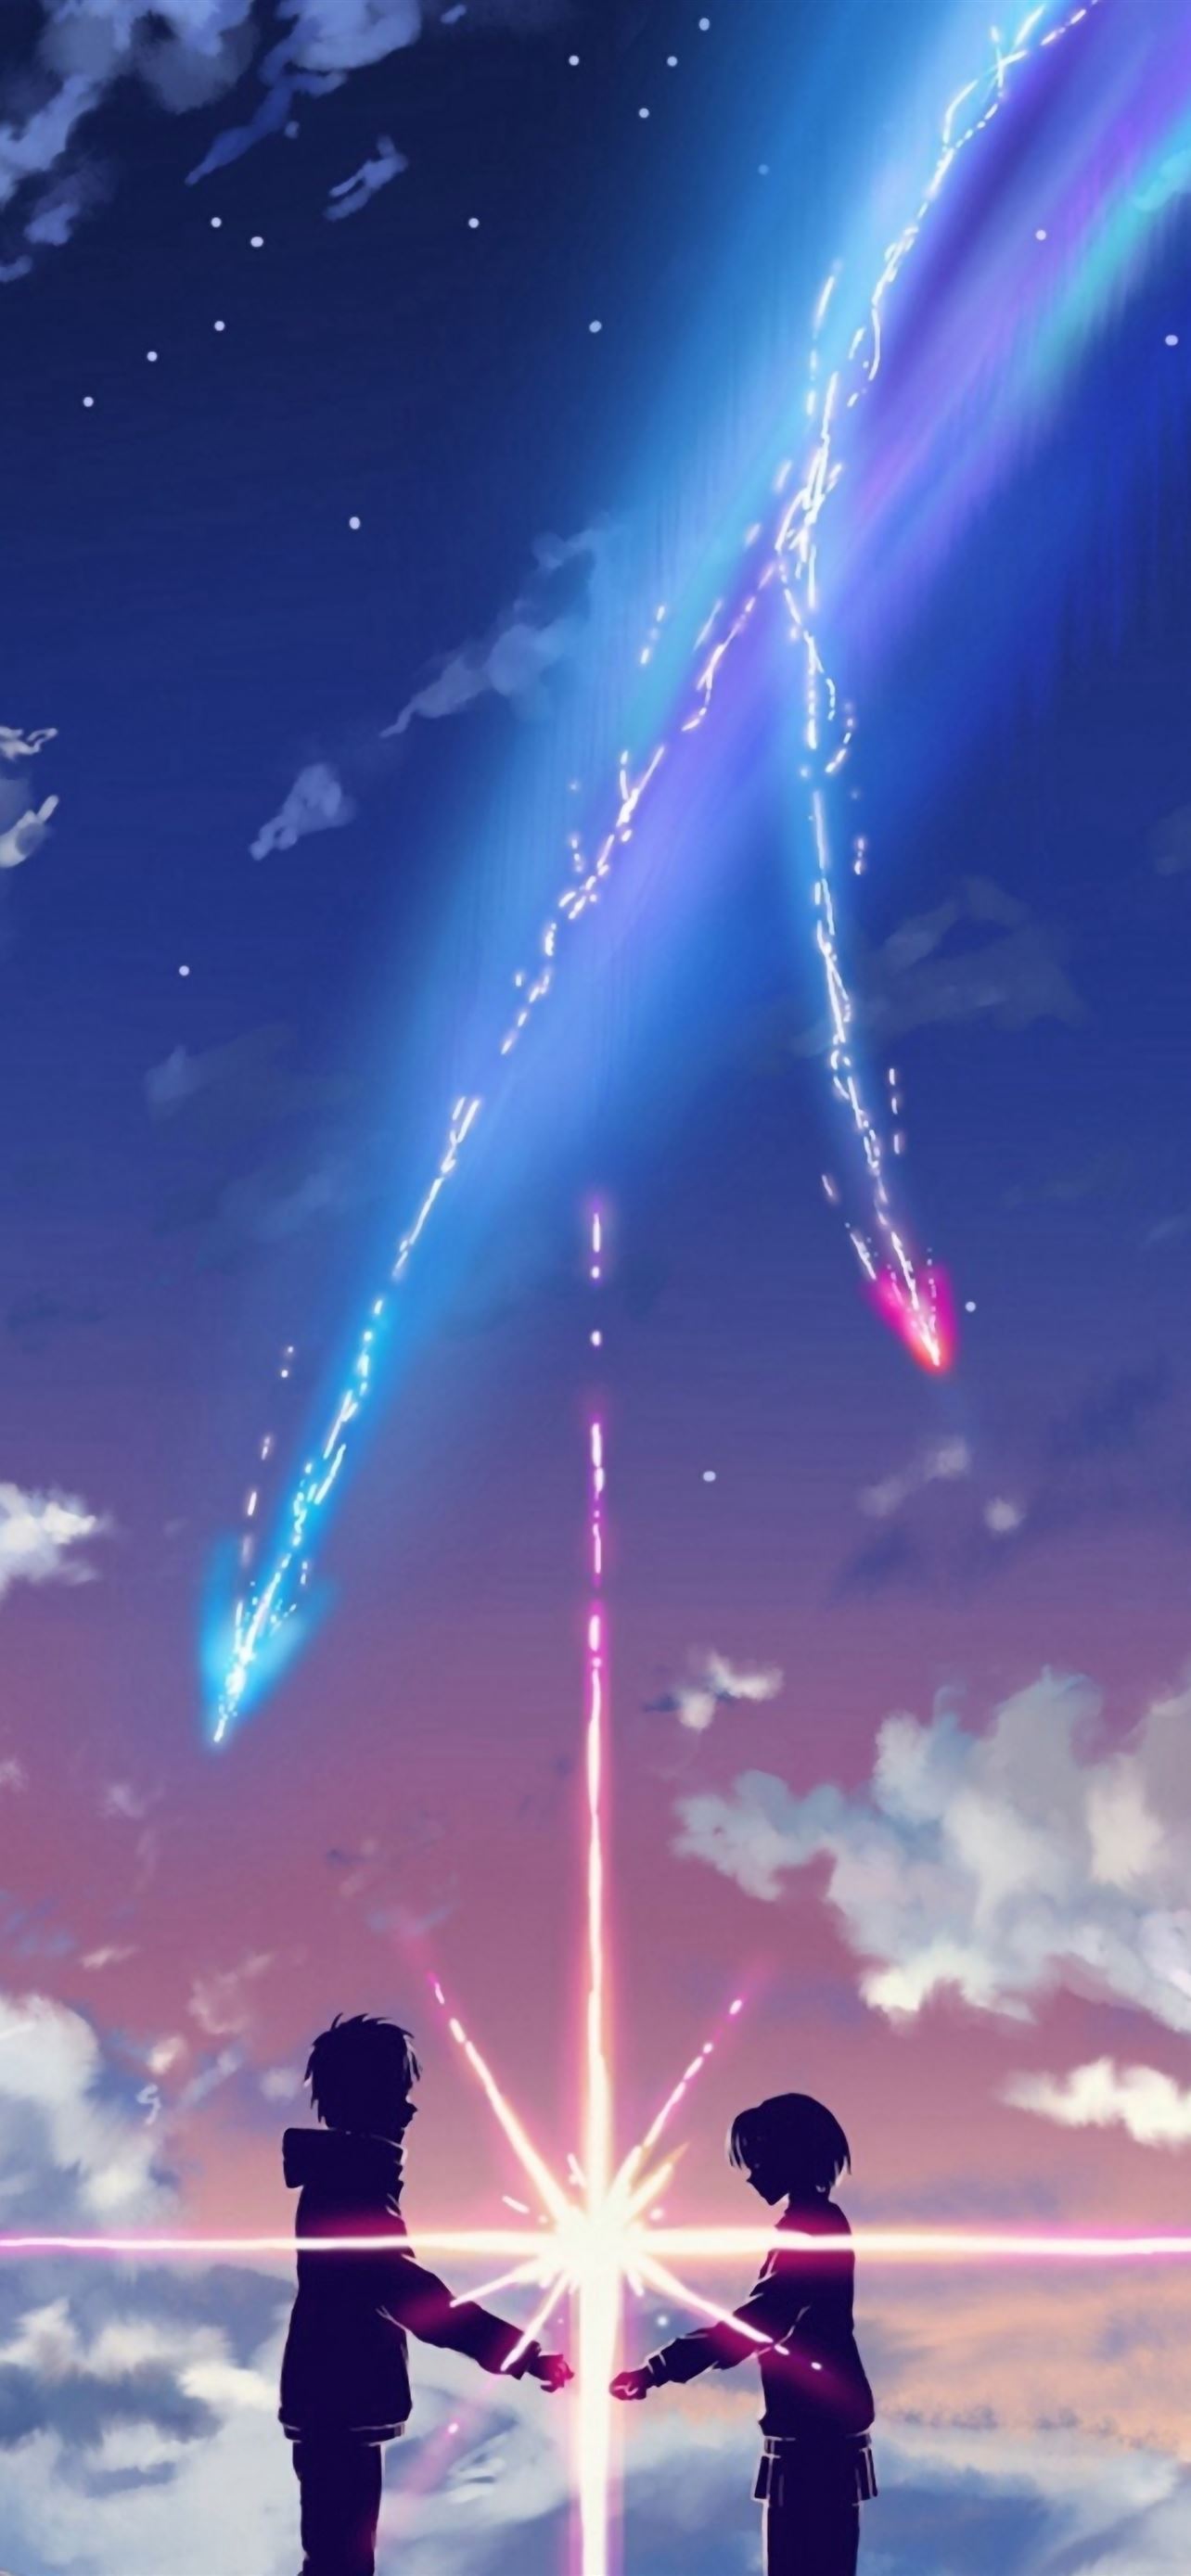 Your Name Live Wallpaper Pc Itsessiii